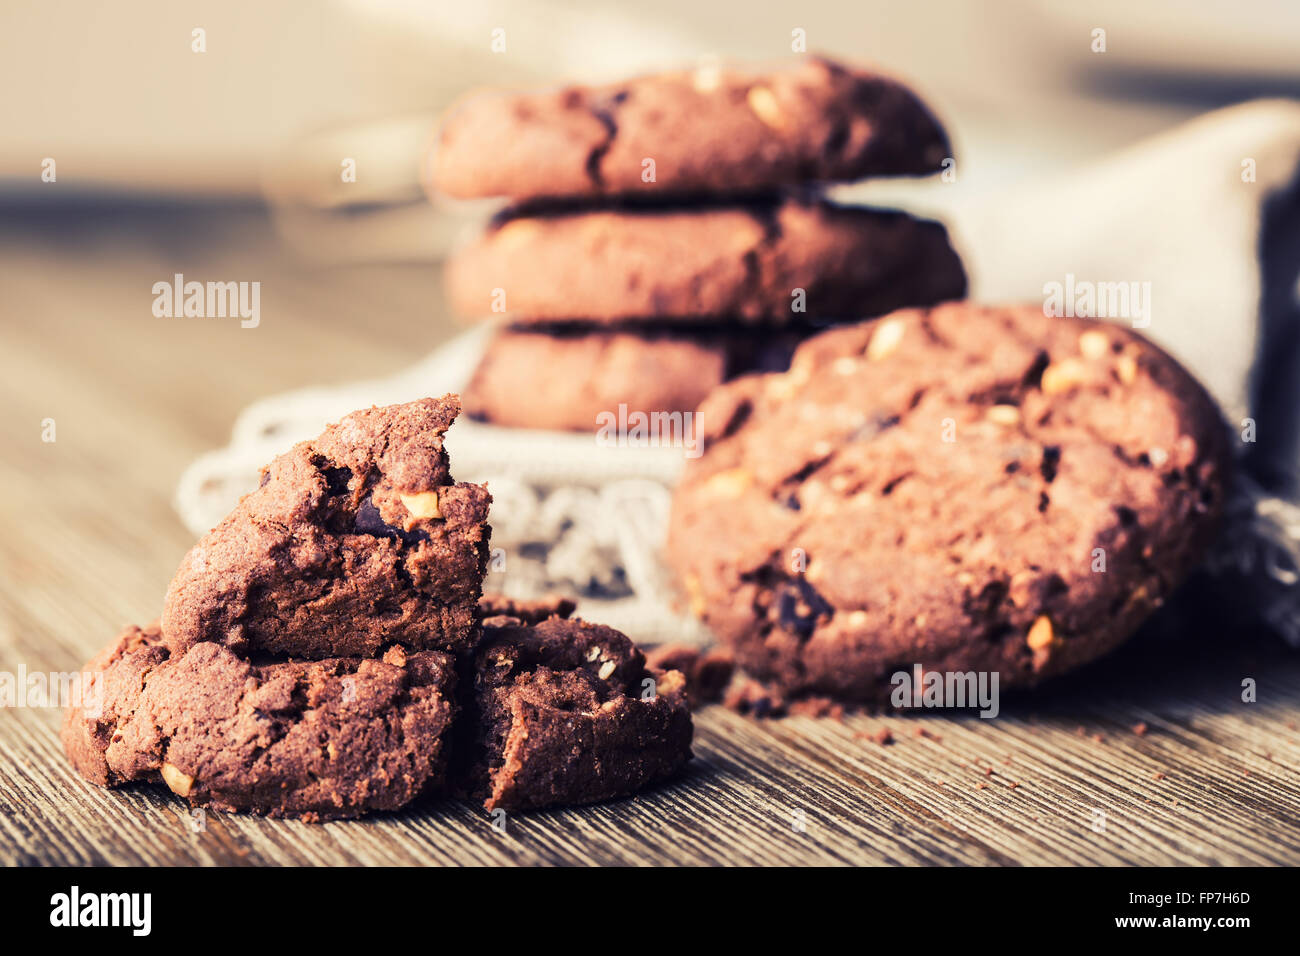 Chocolate biscuit cookies. Chocolate cookies on white linen napkin on wooden table. Stock Photo